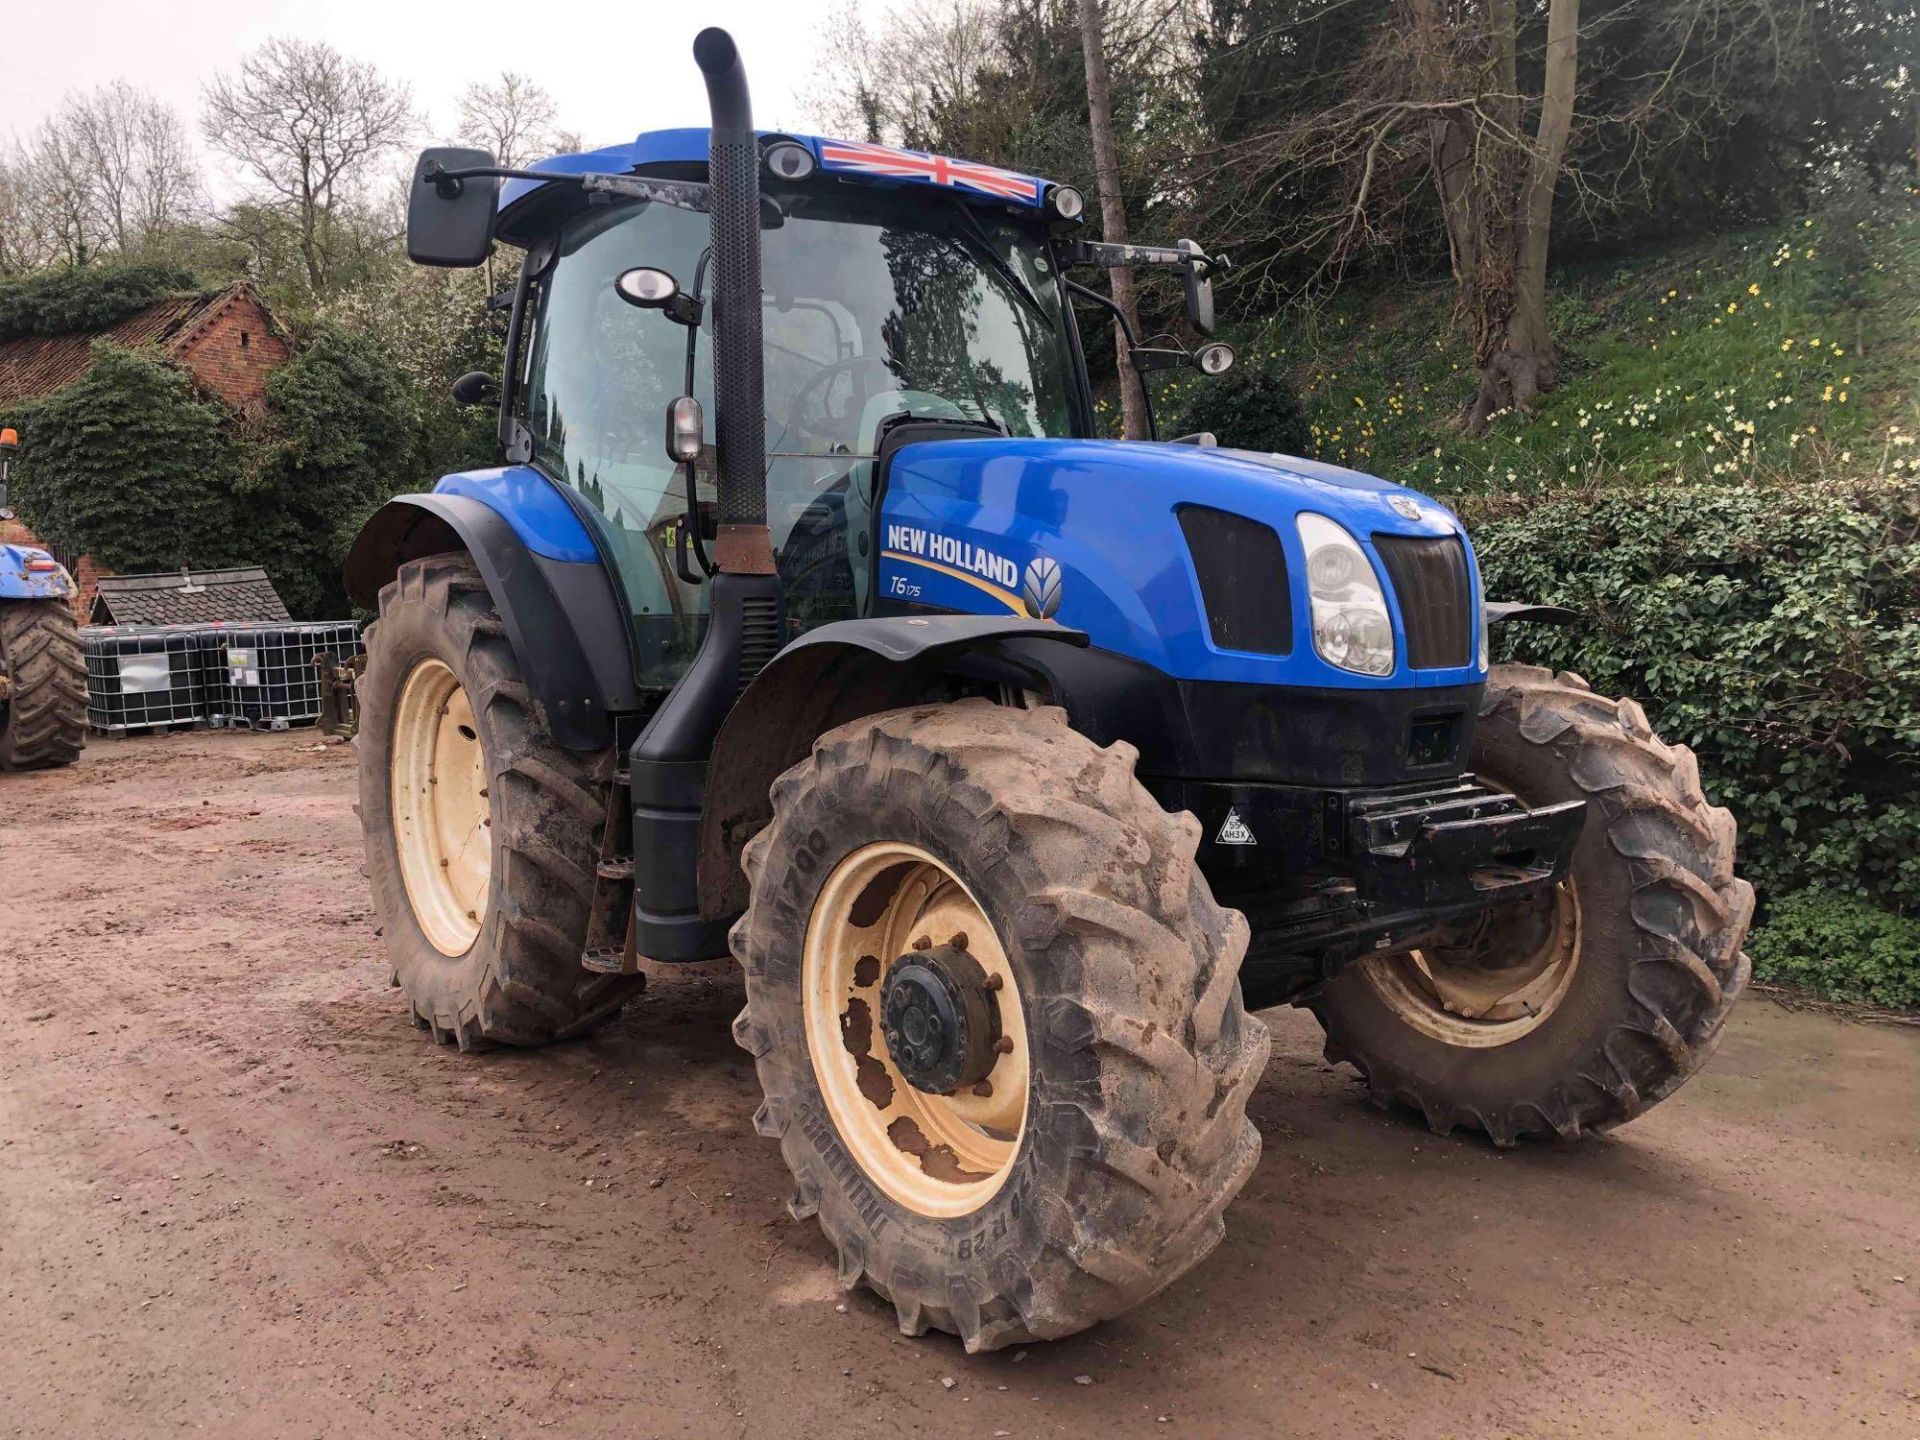 2013 New Holland T6.175 4wd tractor, 3 manual spools, air, on 420/70R28 front and 520/70R38 rear whe - Image 16 of 26